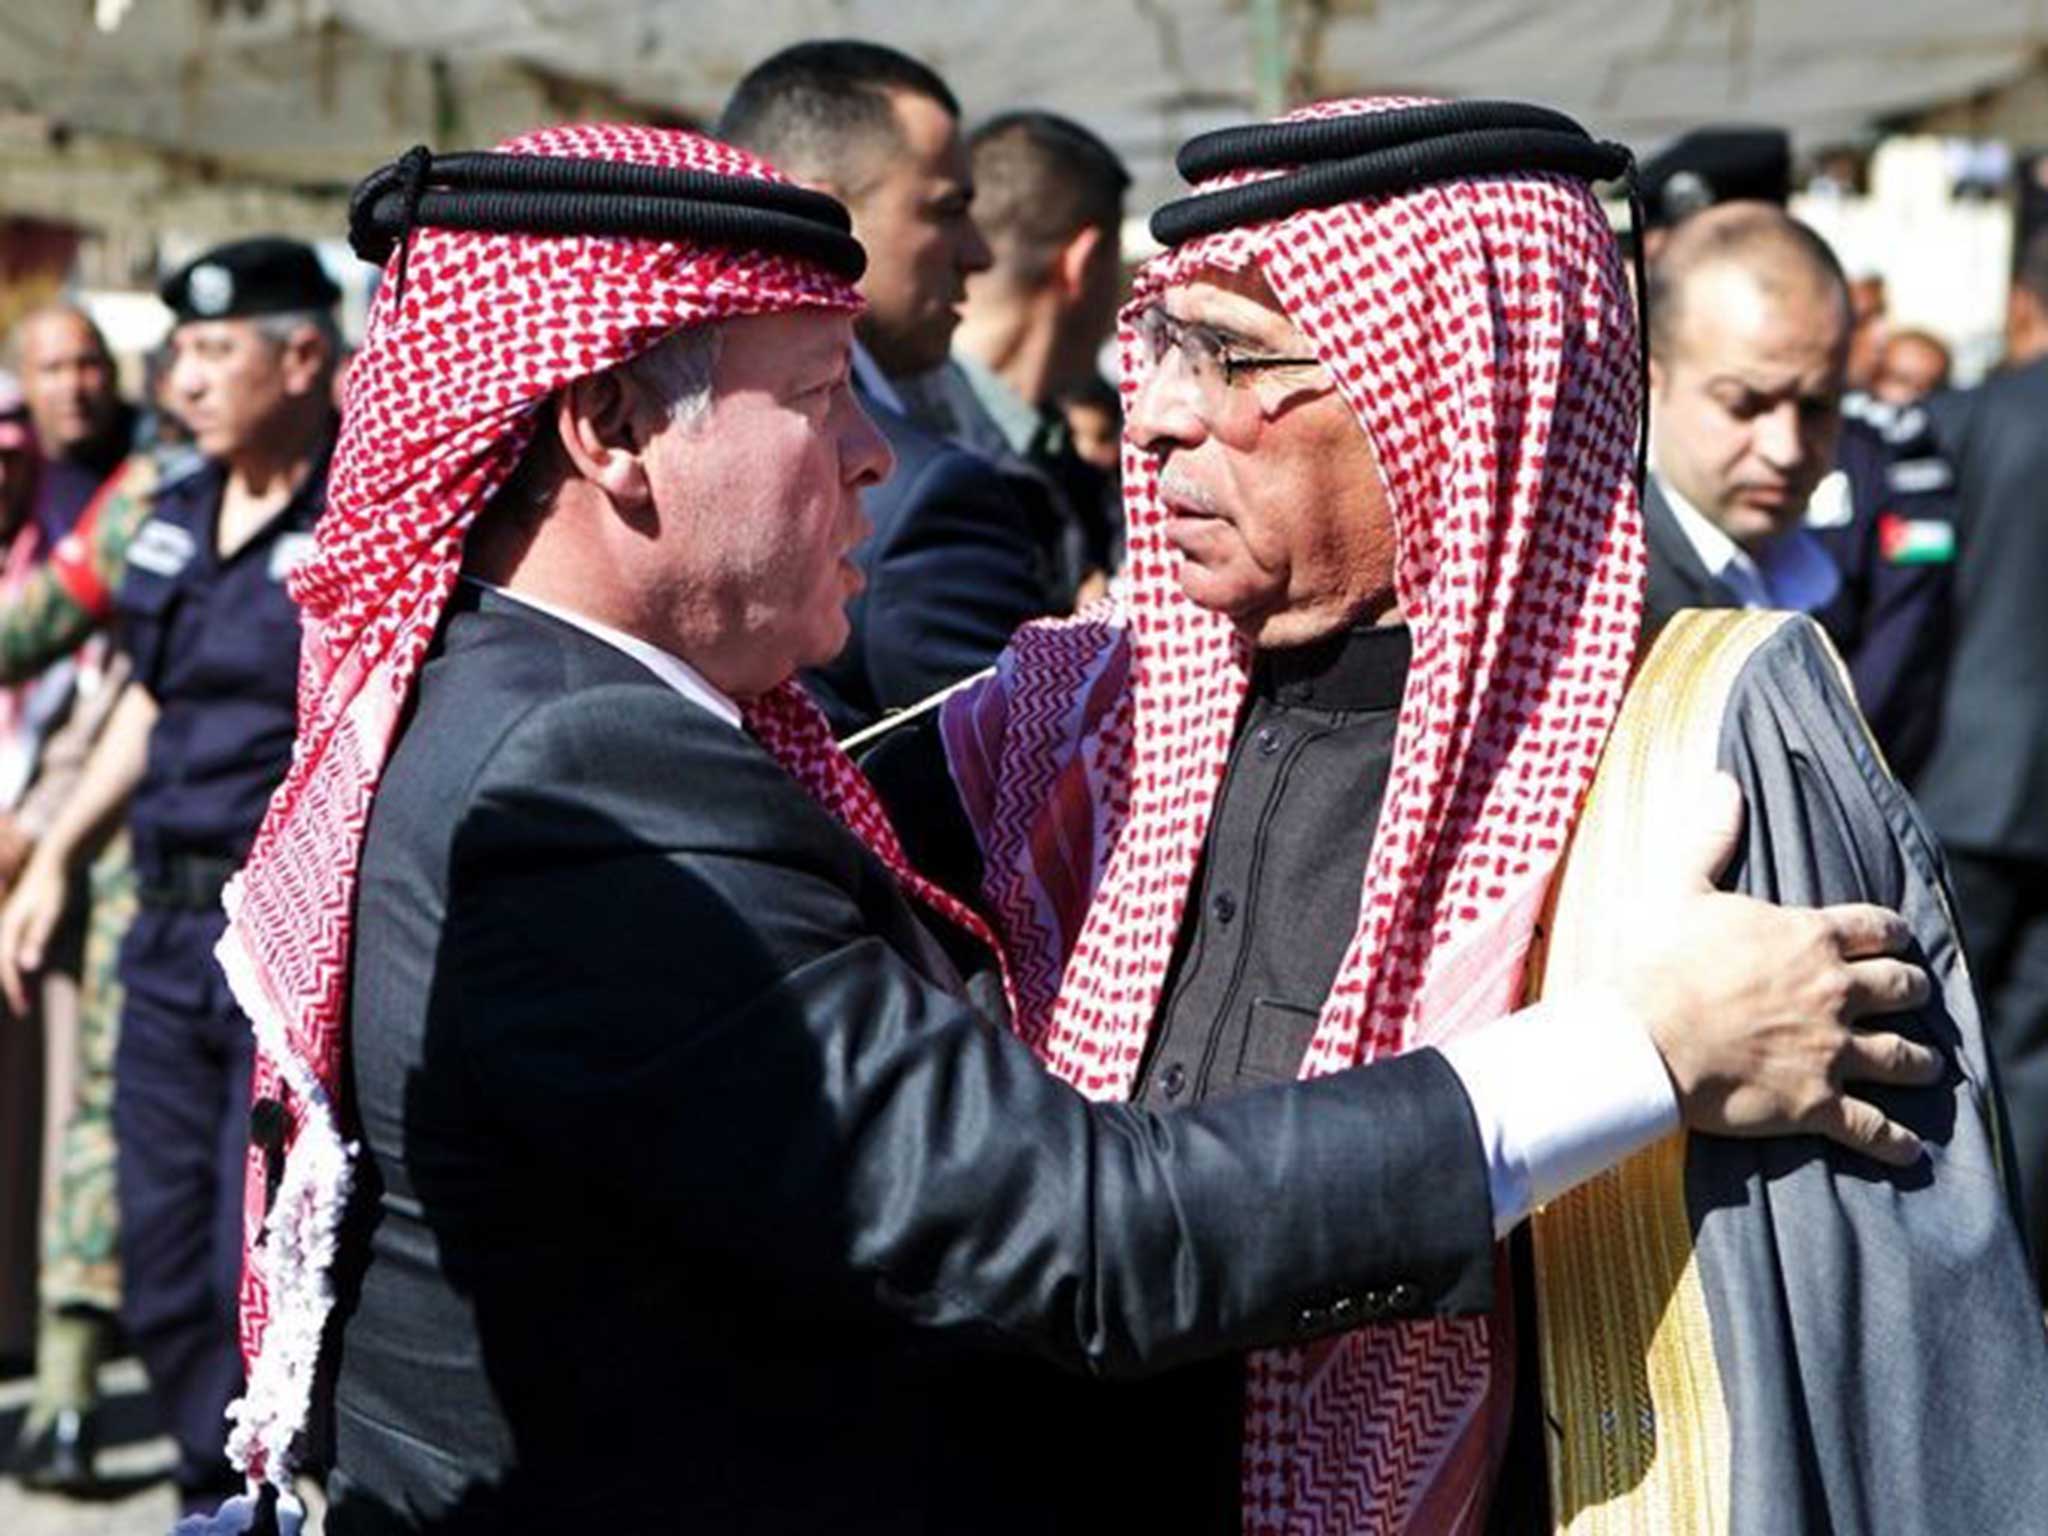 King Abdullah embracing his father Saif (on right)